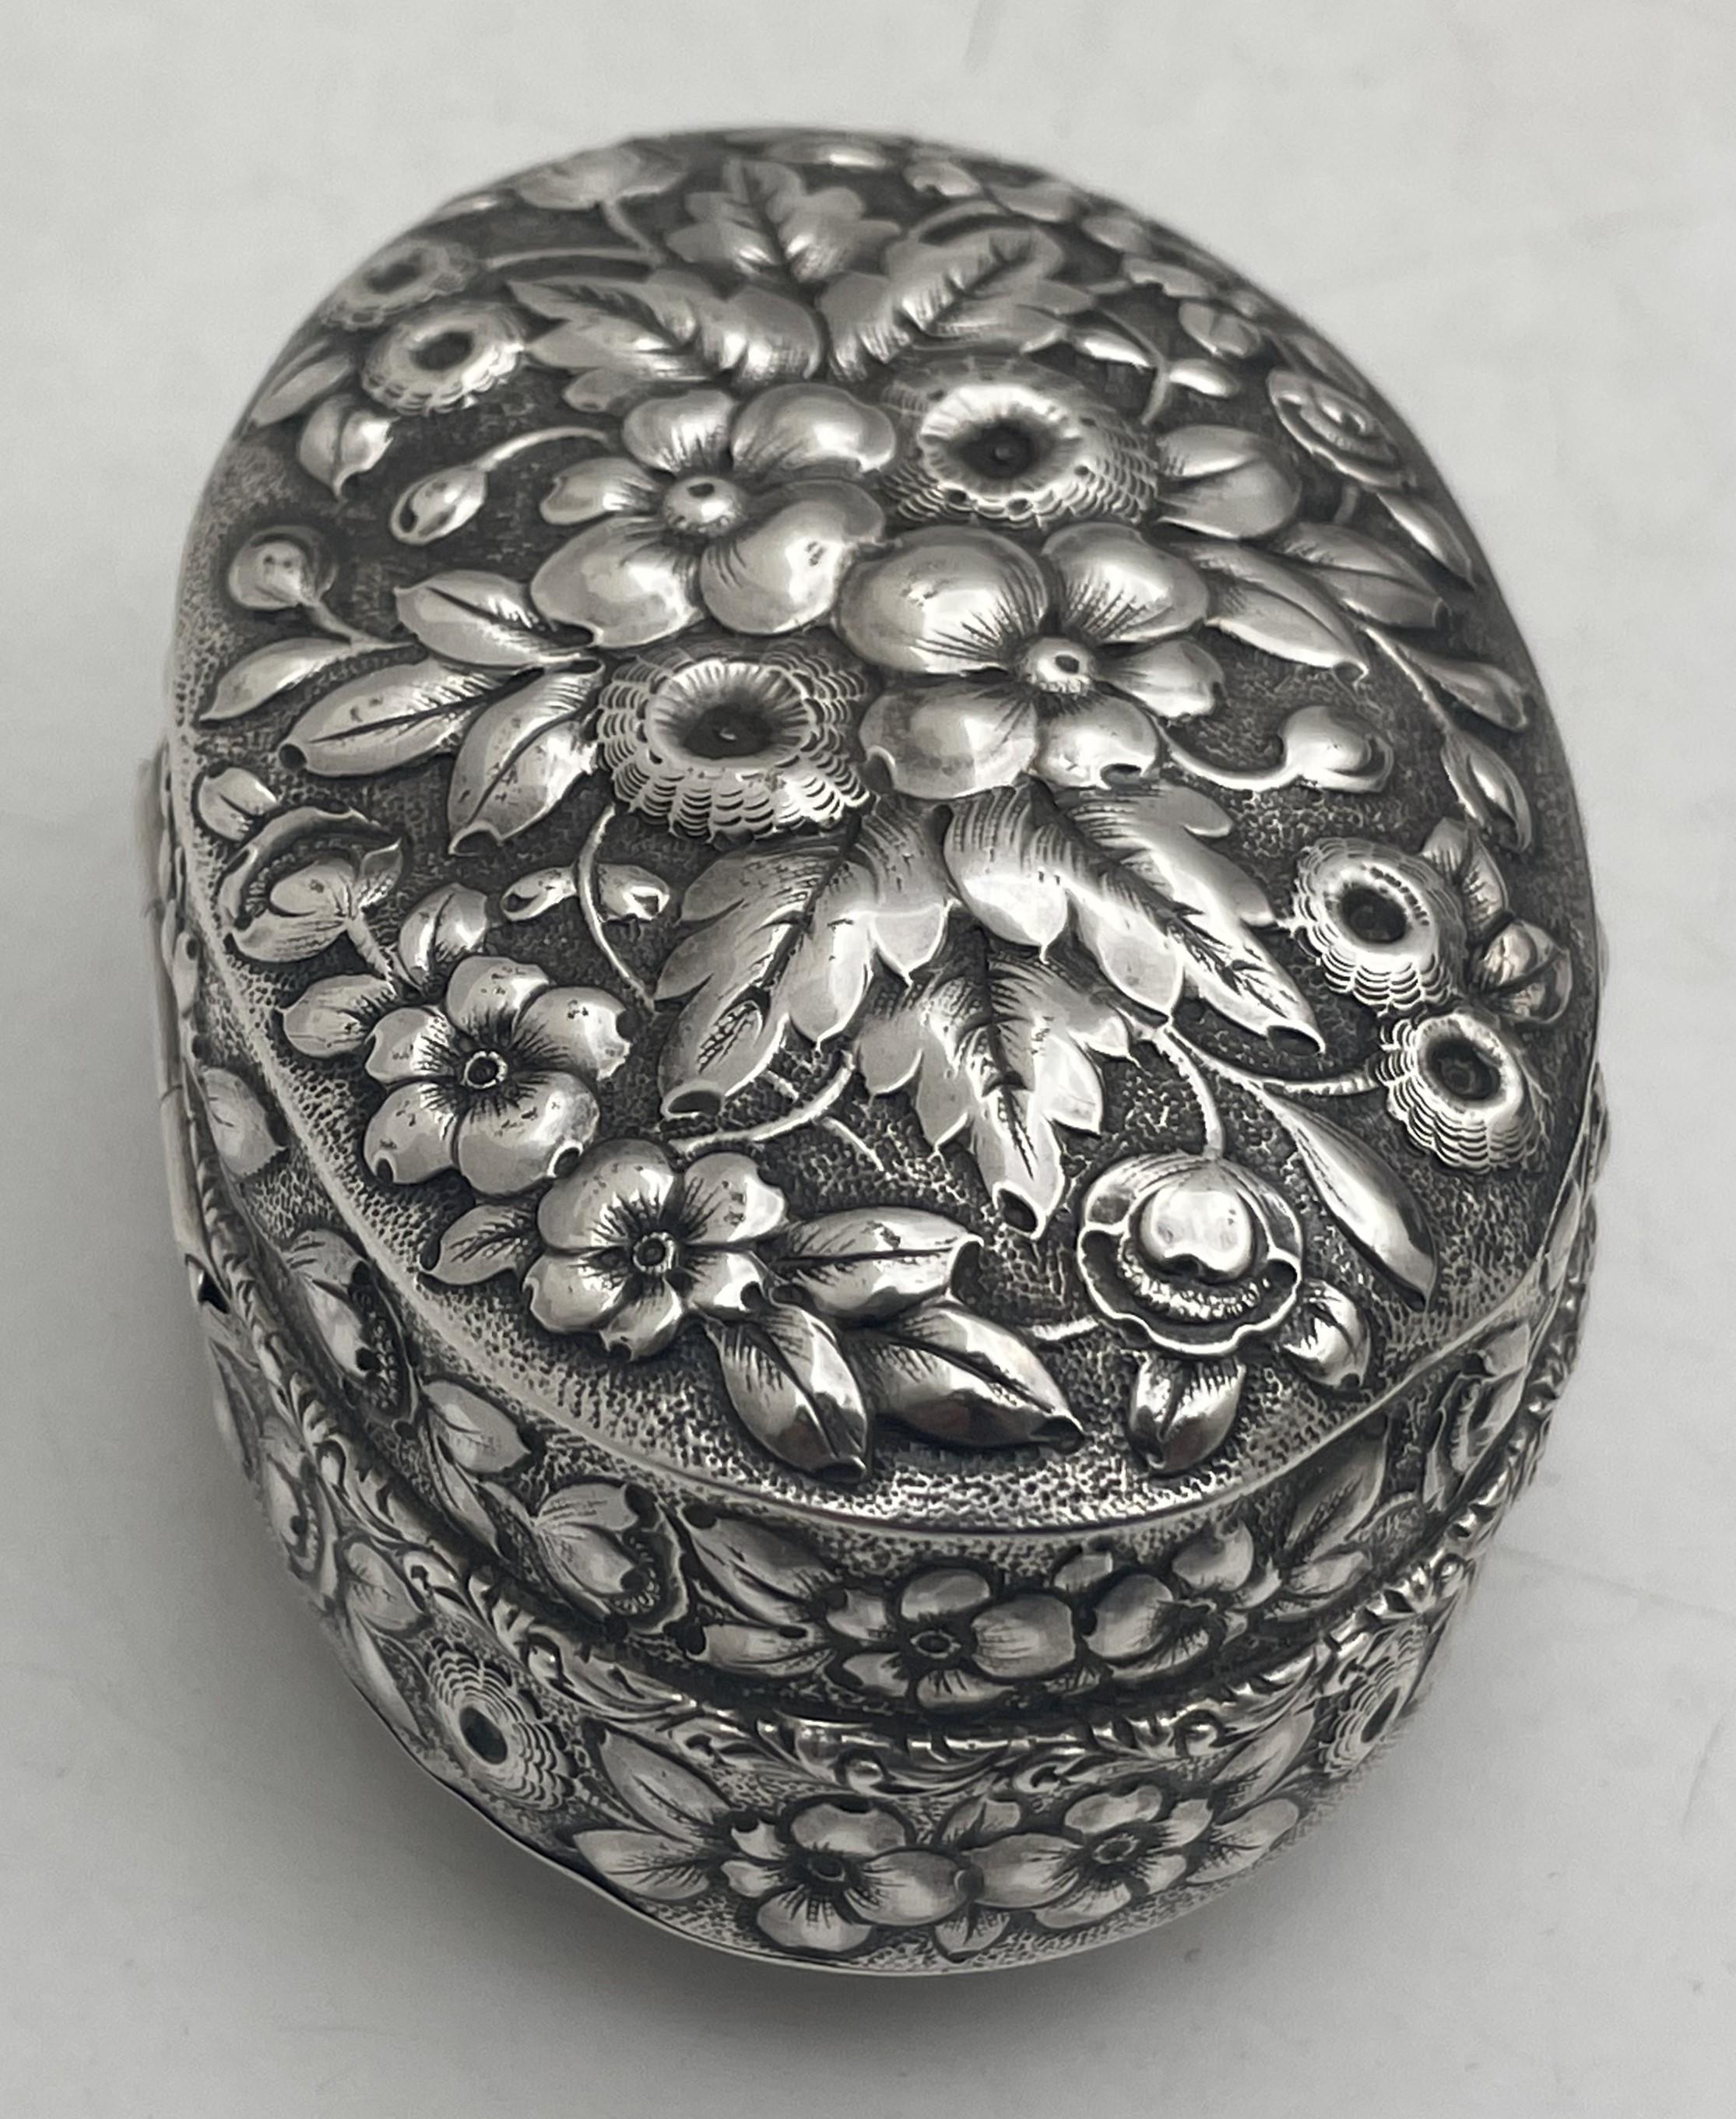 Dominick & Haff for Bailey, Banks & Biddle sterling silver oval snuff box in repousse pattern, beautifully adorned with floral motifs. It measures 3 3/8'' by 2 1/2'' by 1 5/8'' in height, and bears hallmarks as shown.

Dominick & Haff was an